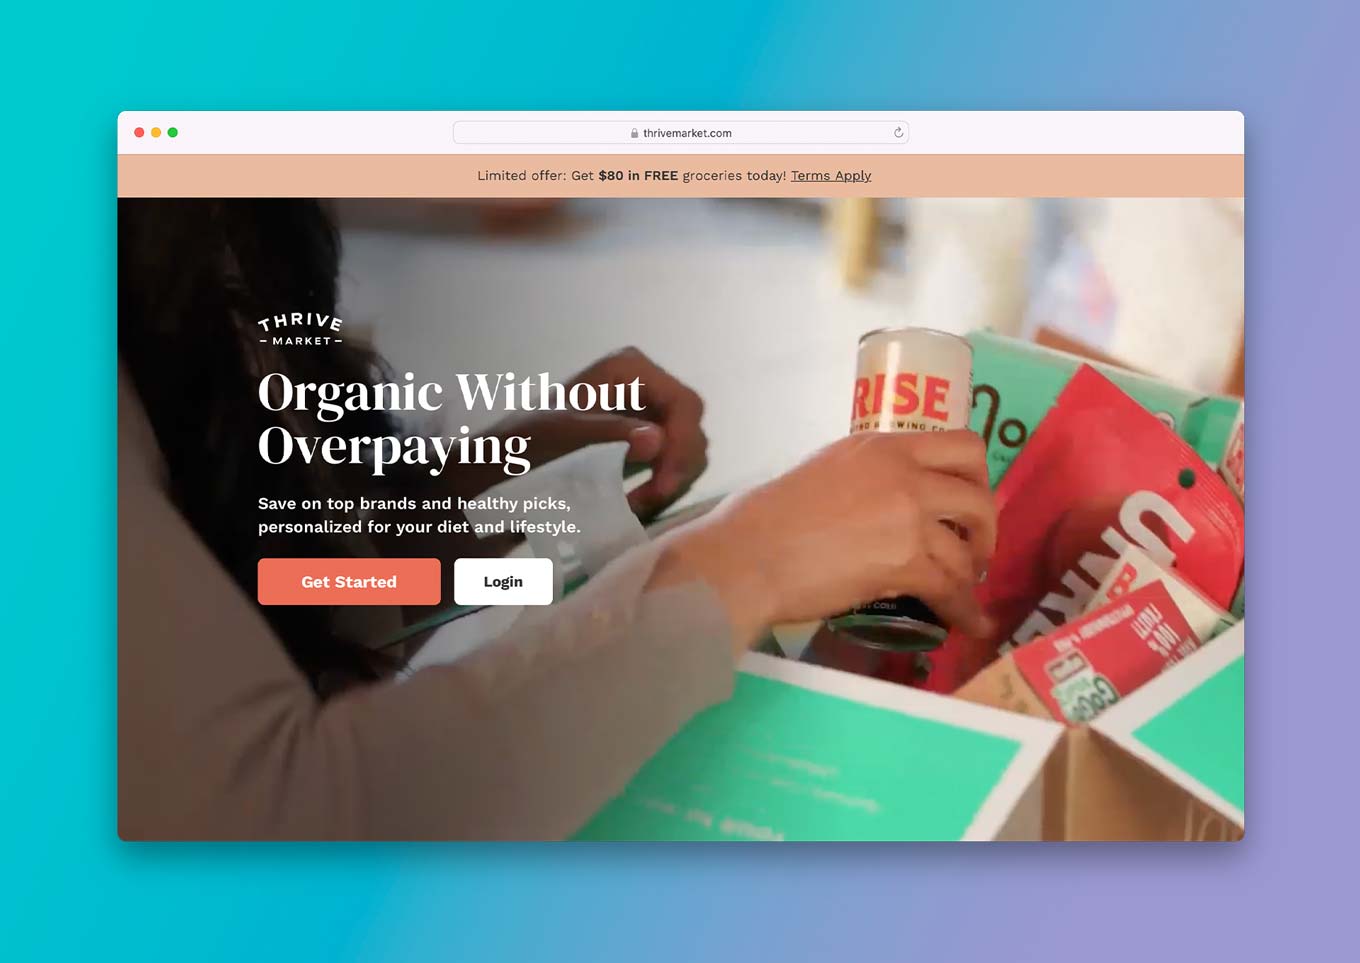 Thrive Market Website: "Organic Without Overpaying"